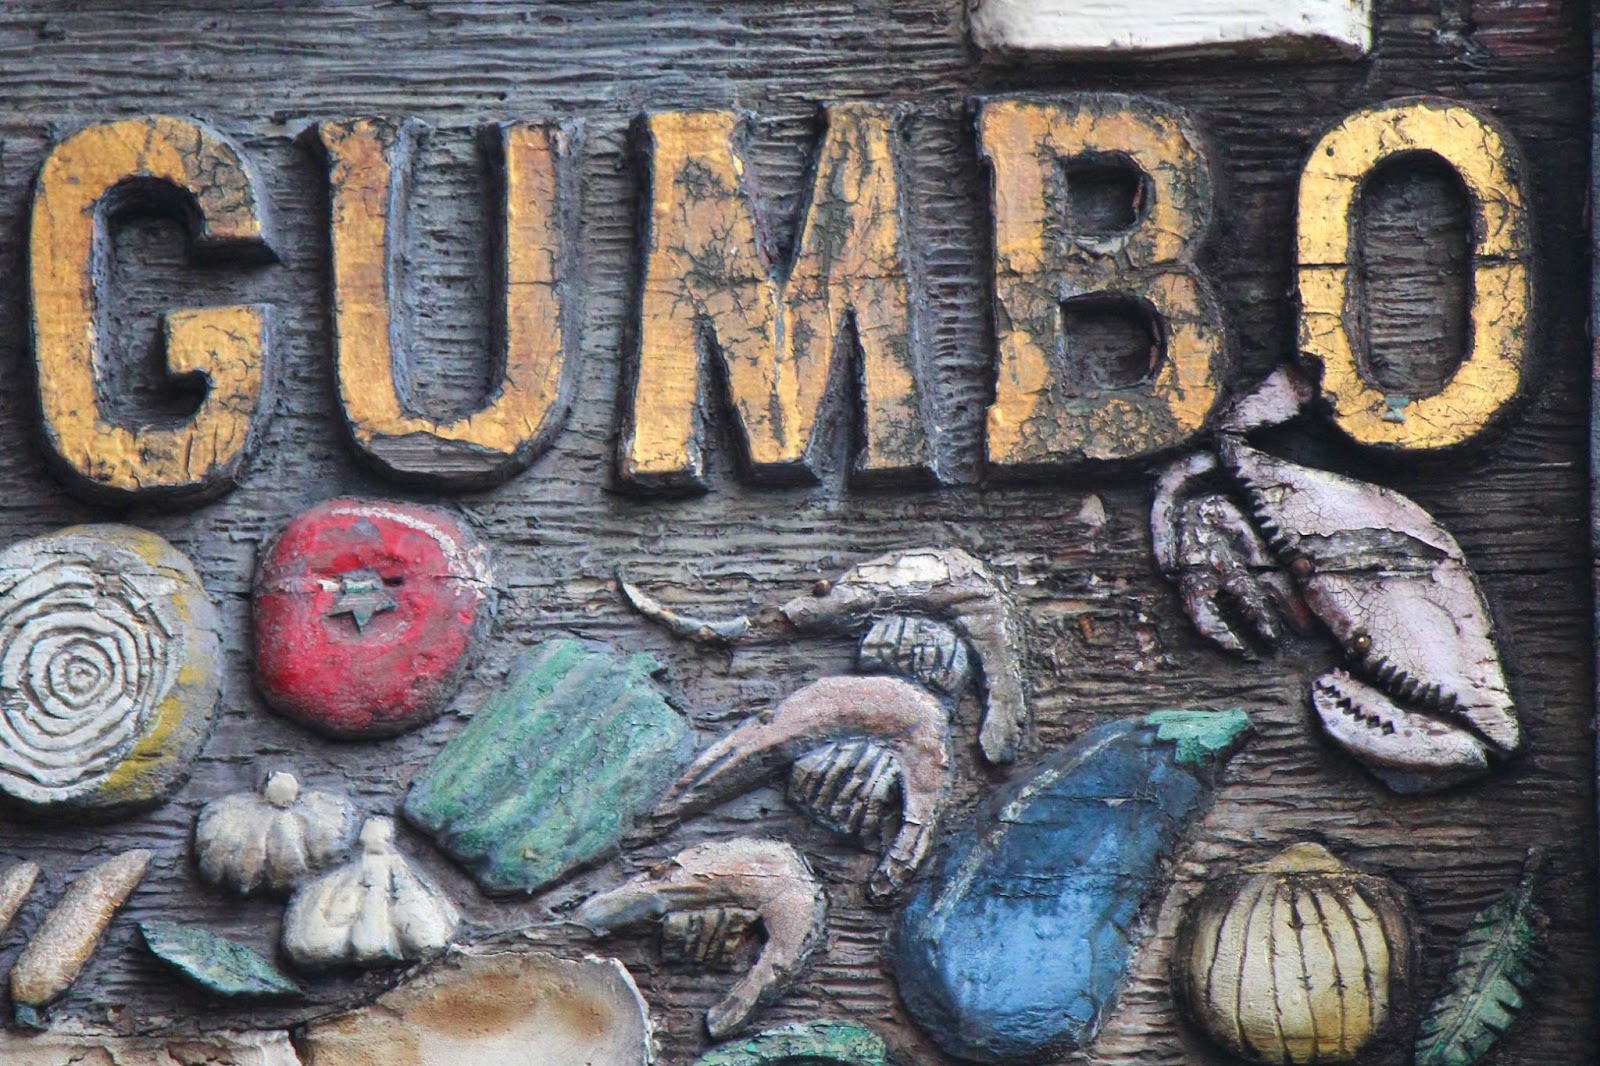 Gumbo wood carving